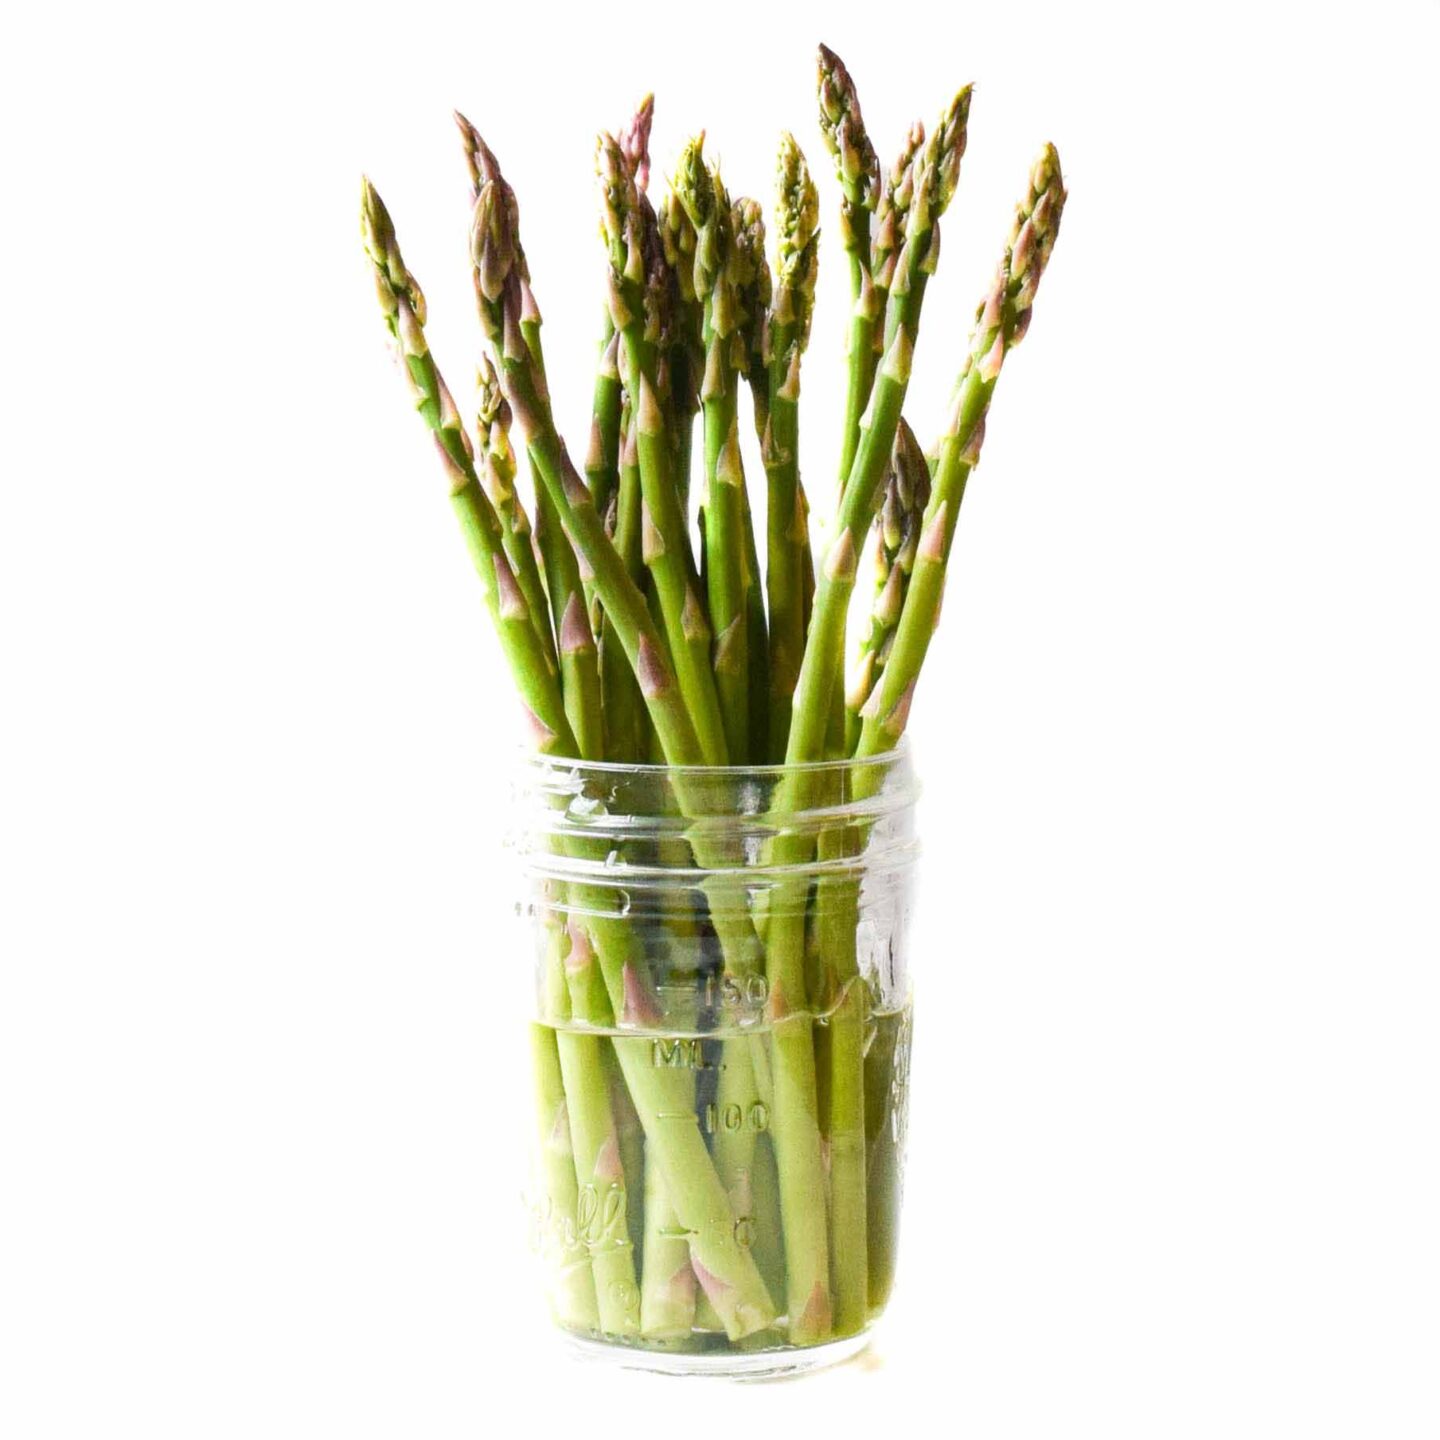 Green asparagus in a glass of water